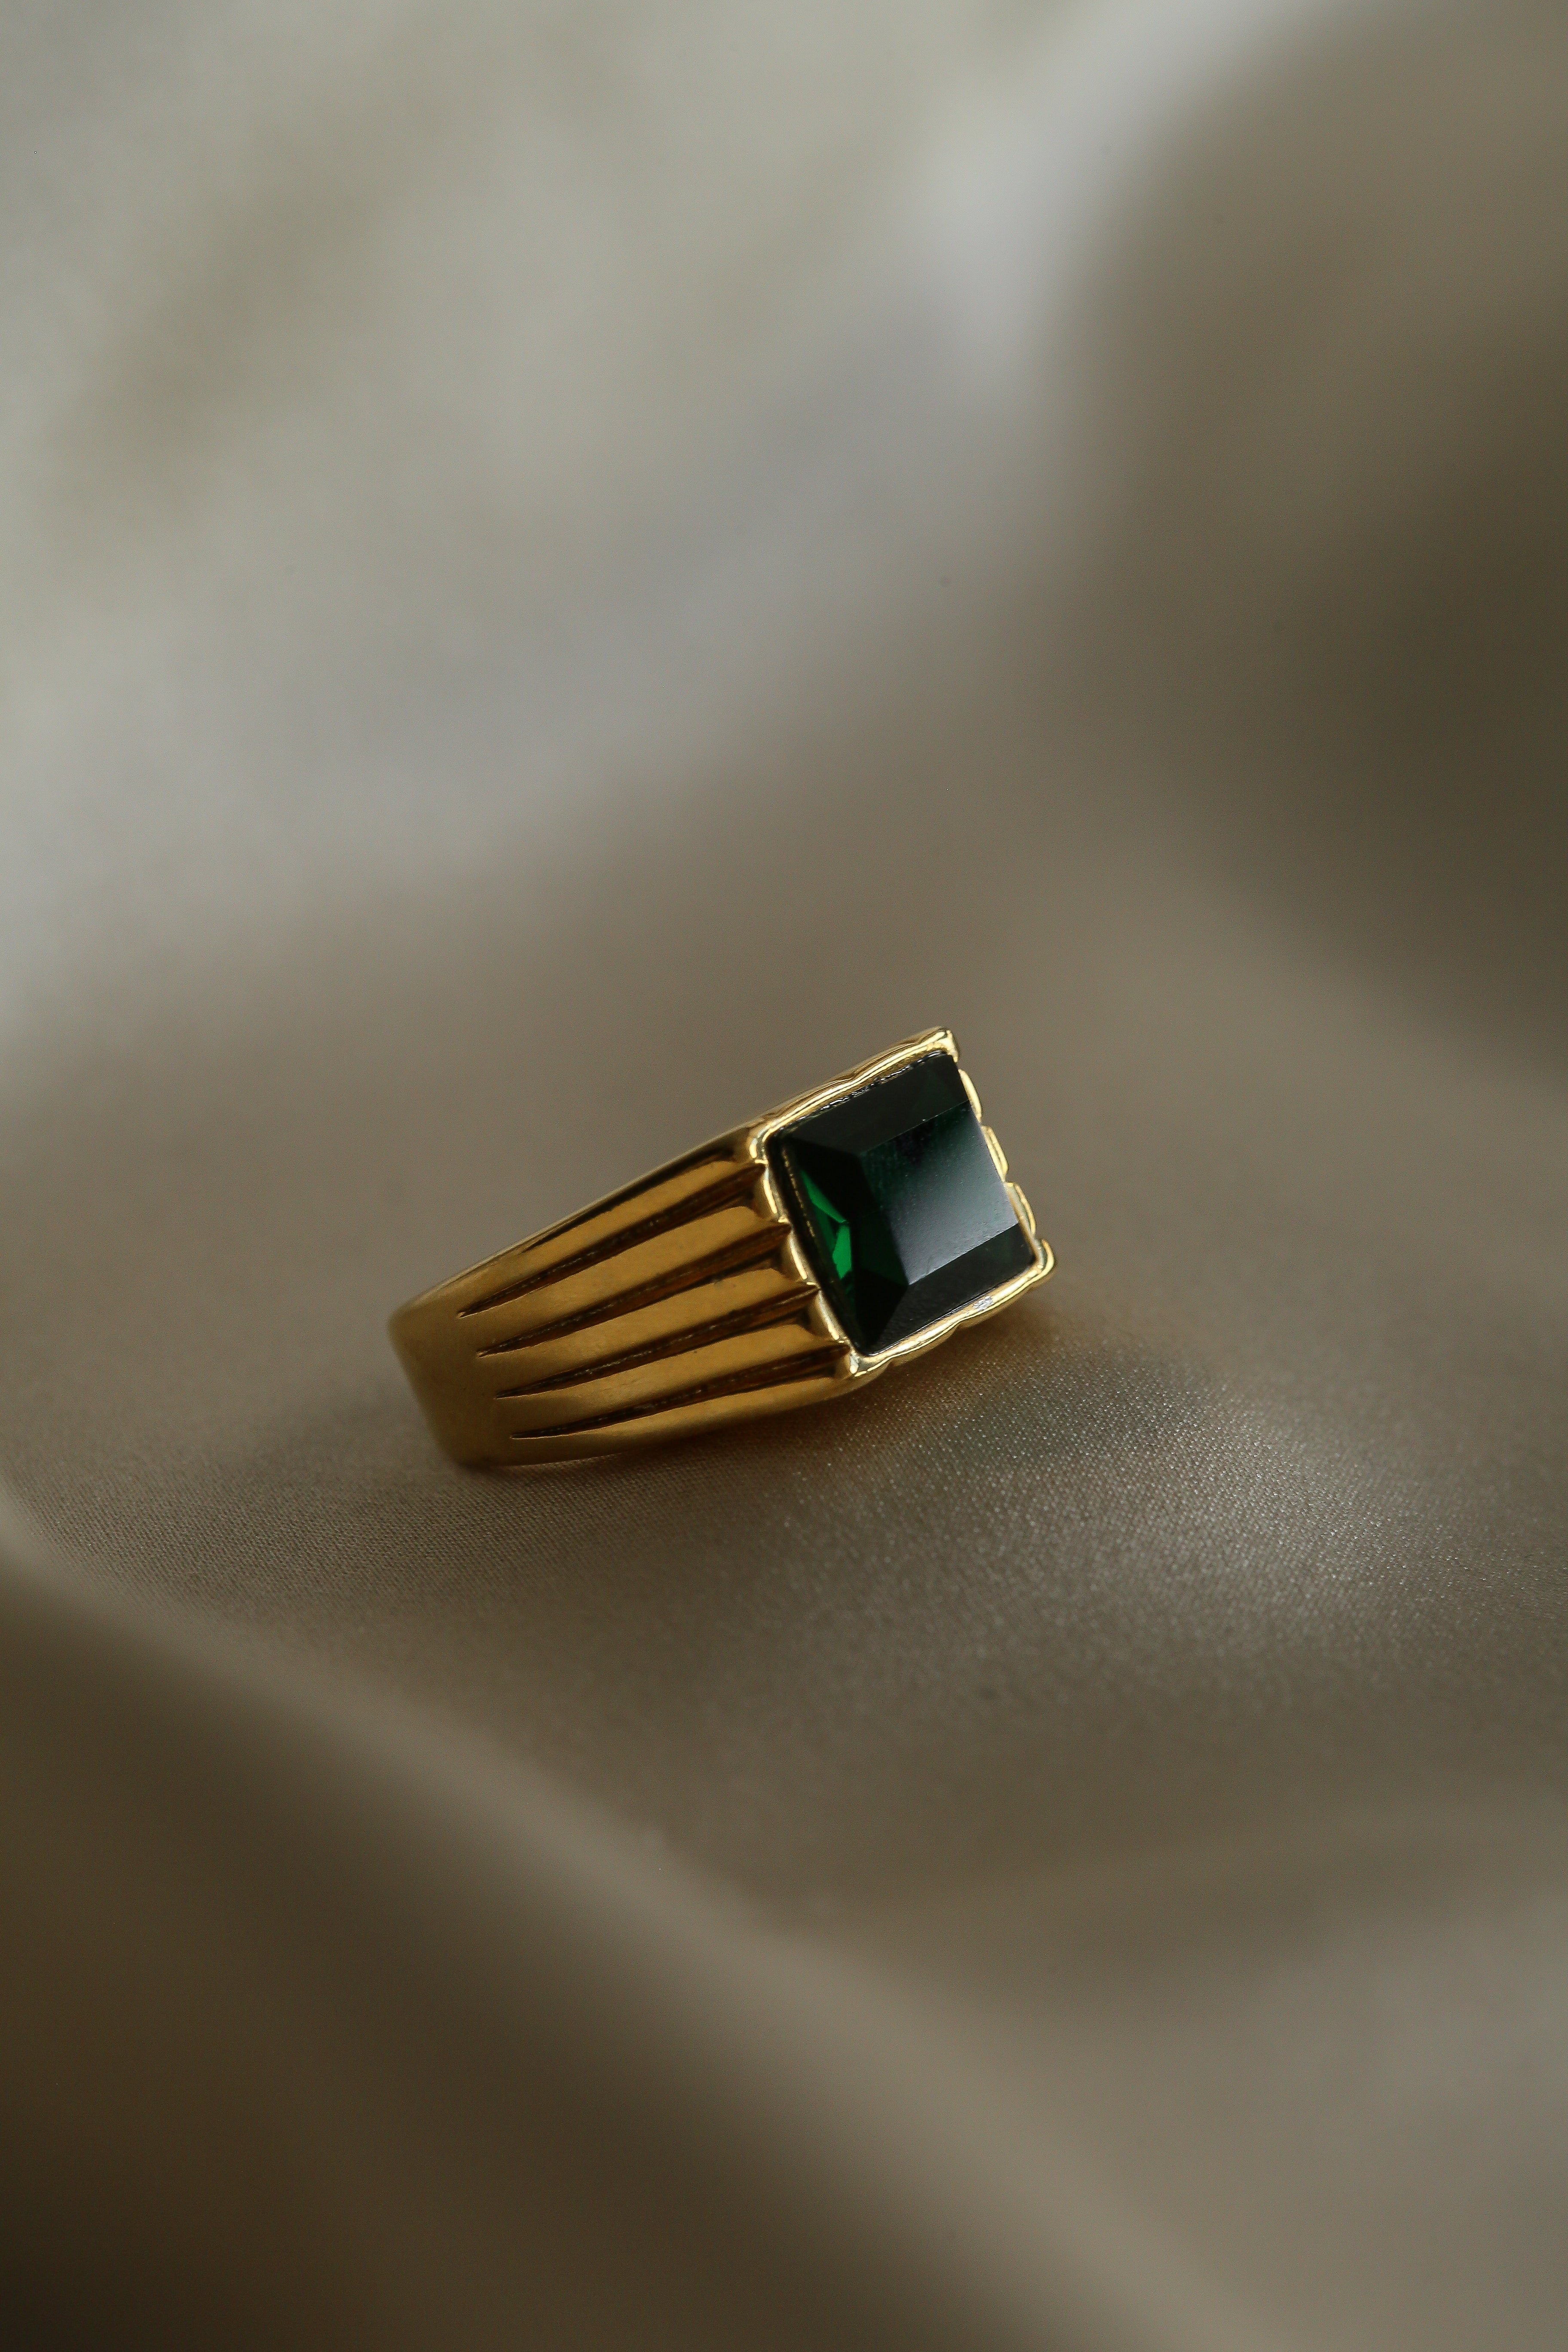 Ida Ring - Boutique Minimaliste has waterproof, durable, elegant and vintage inspired jewelry